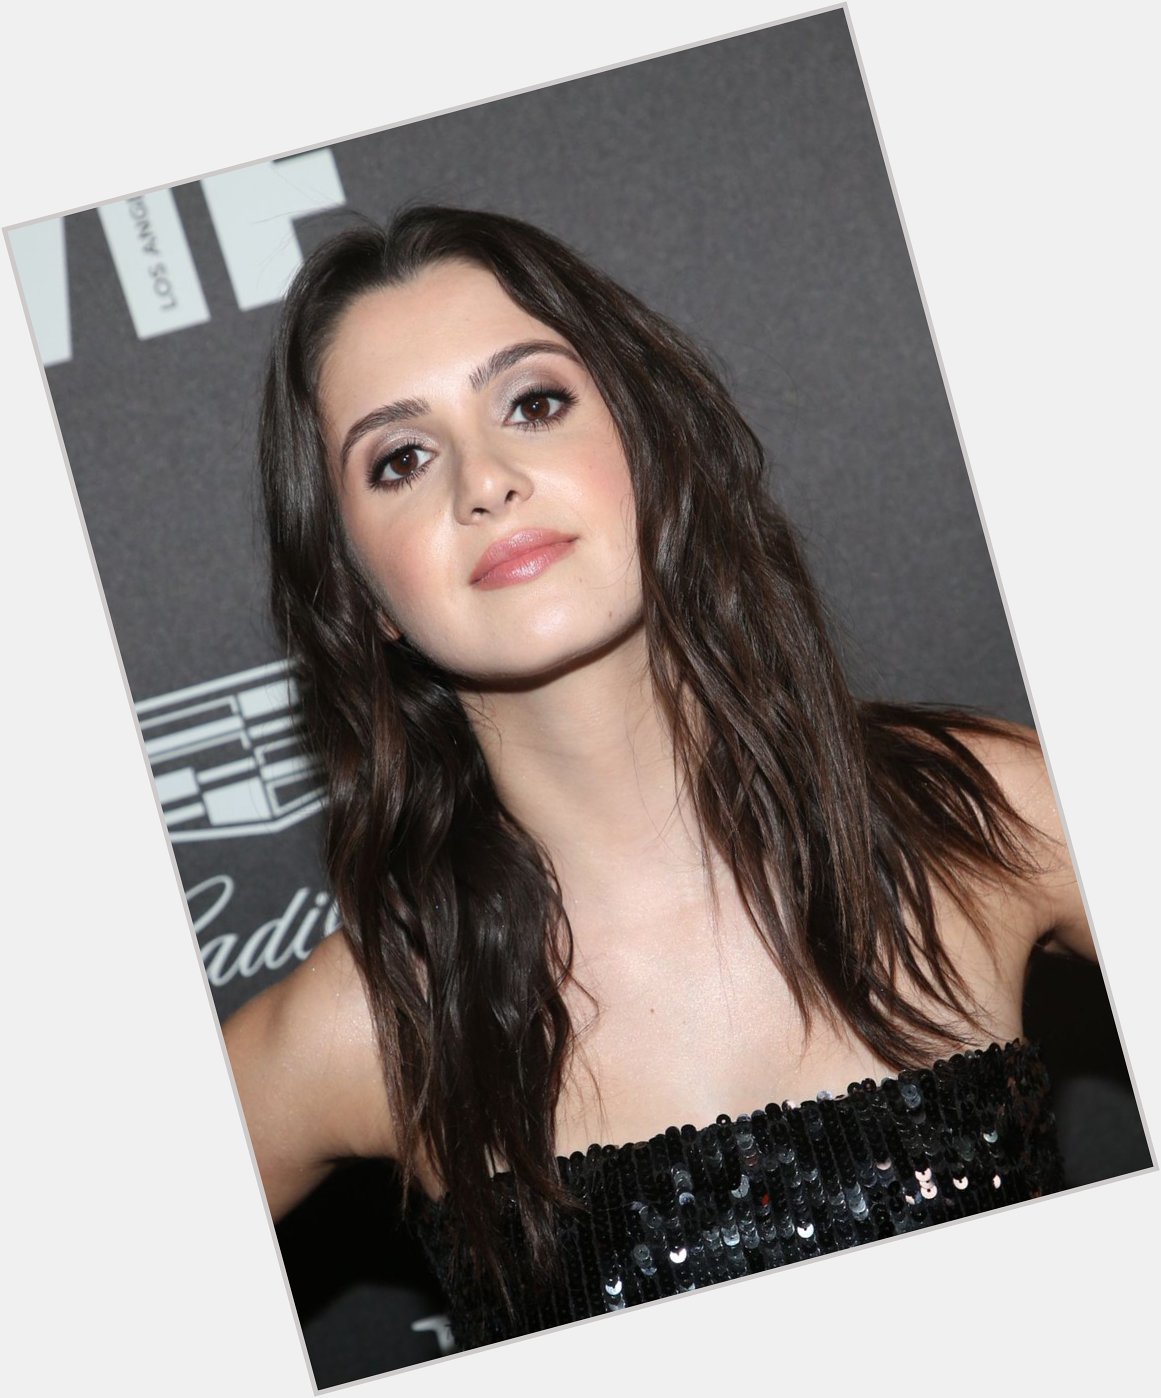 Double Happy Birthday day today. First up is Laura Marano. Next up is the lovely Imogen Thomas!! 